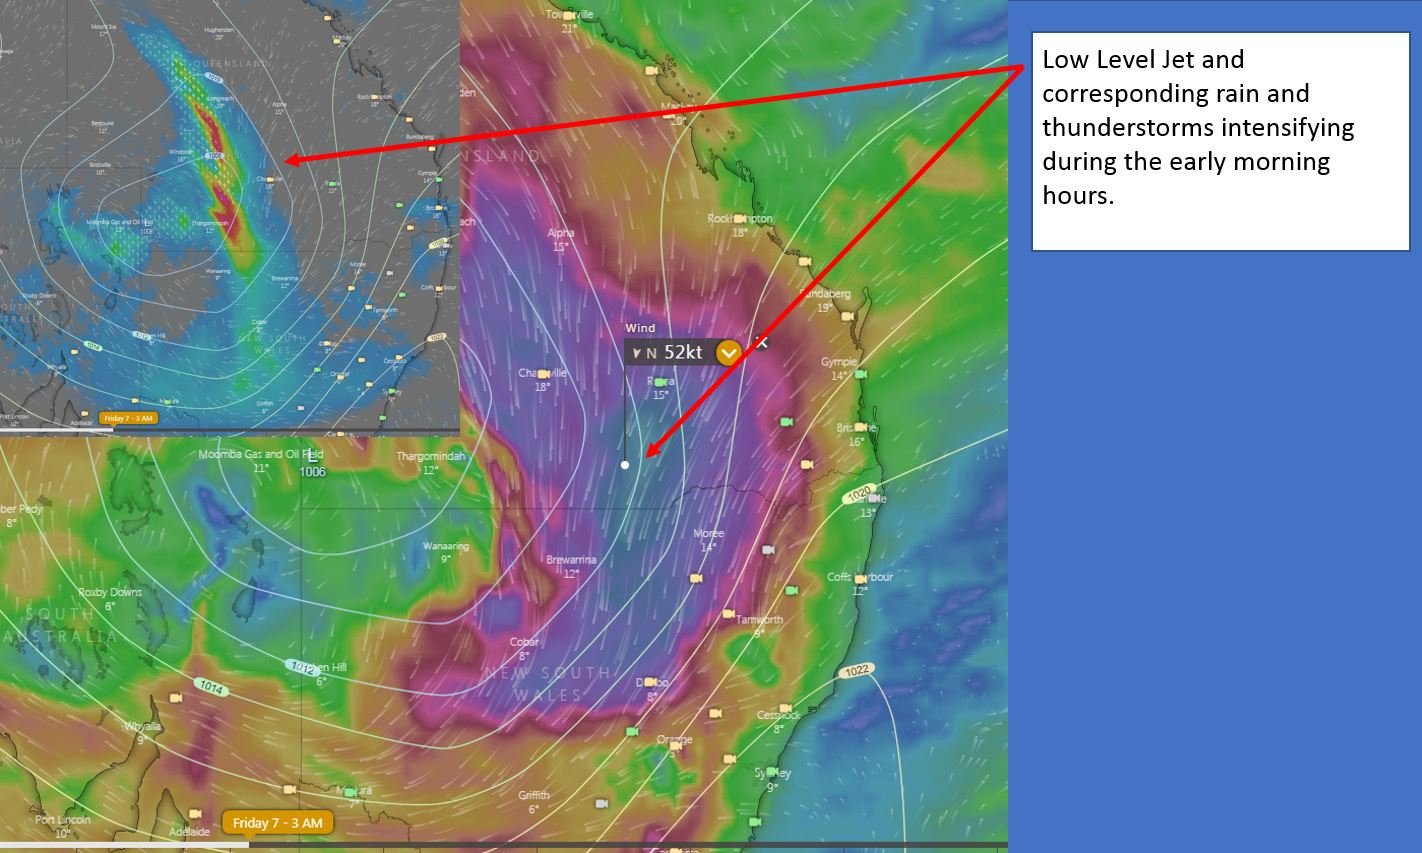 Low Level Jet and corresponding rain and thunderstorms. Image via windy.com